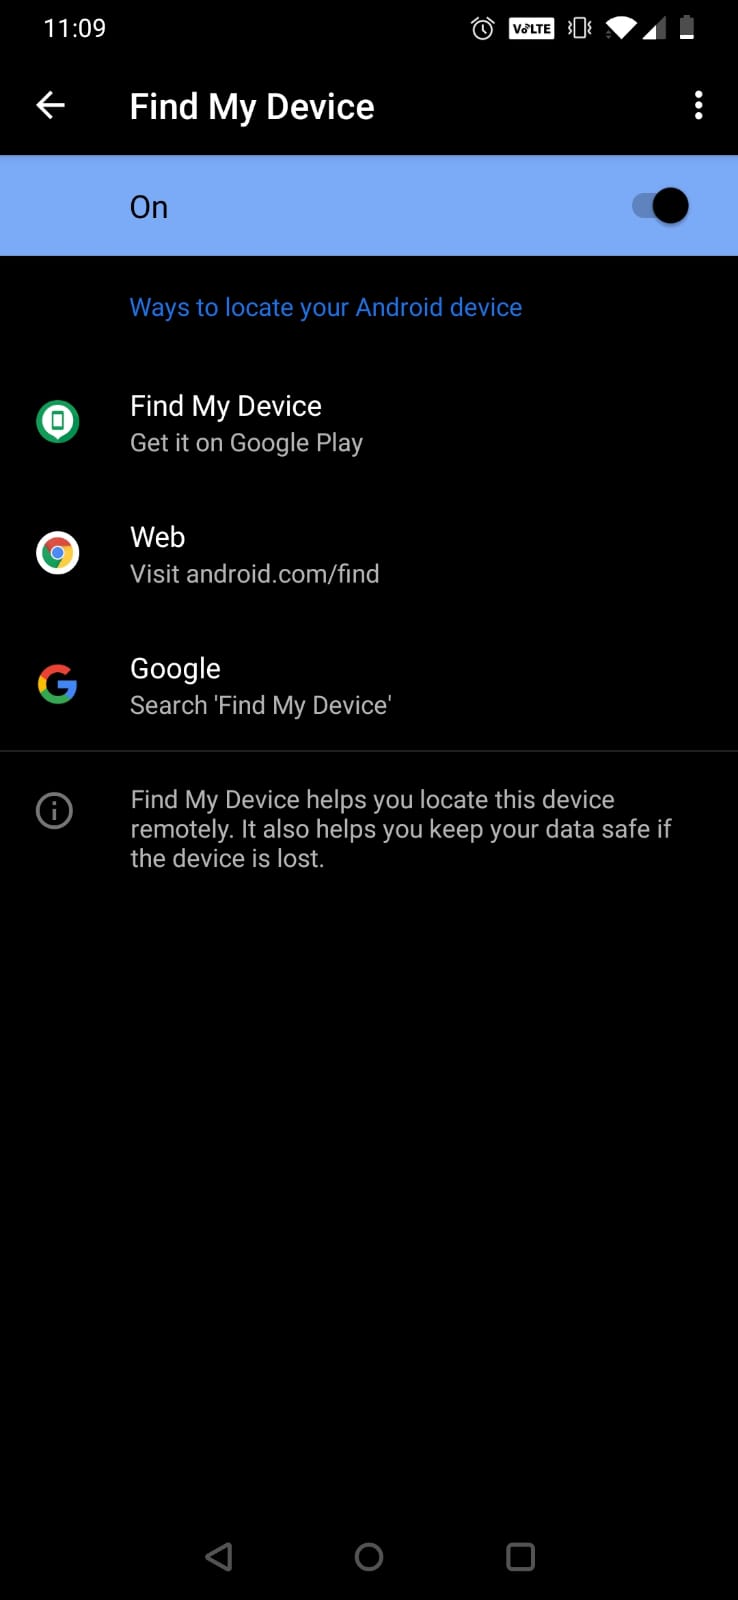 One of the limitations with Google Find My Device is that Find My Device has to be turned on